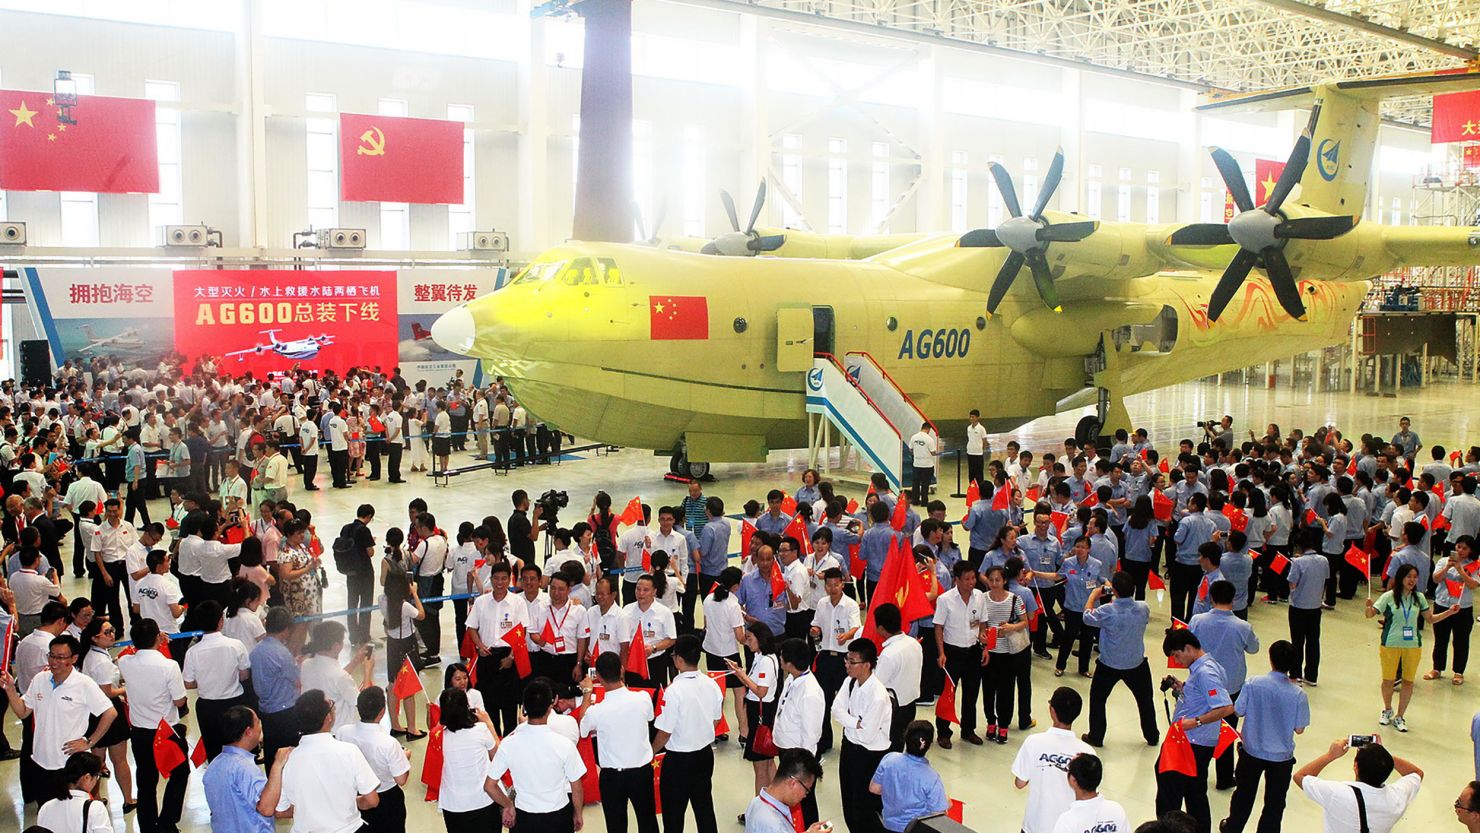 China says the AG600 amphibious plane is the world's largest.